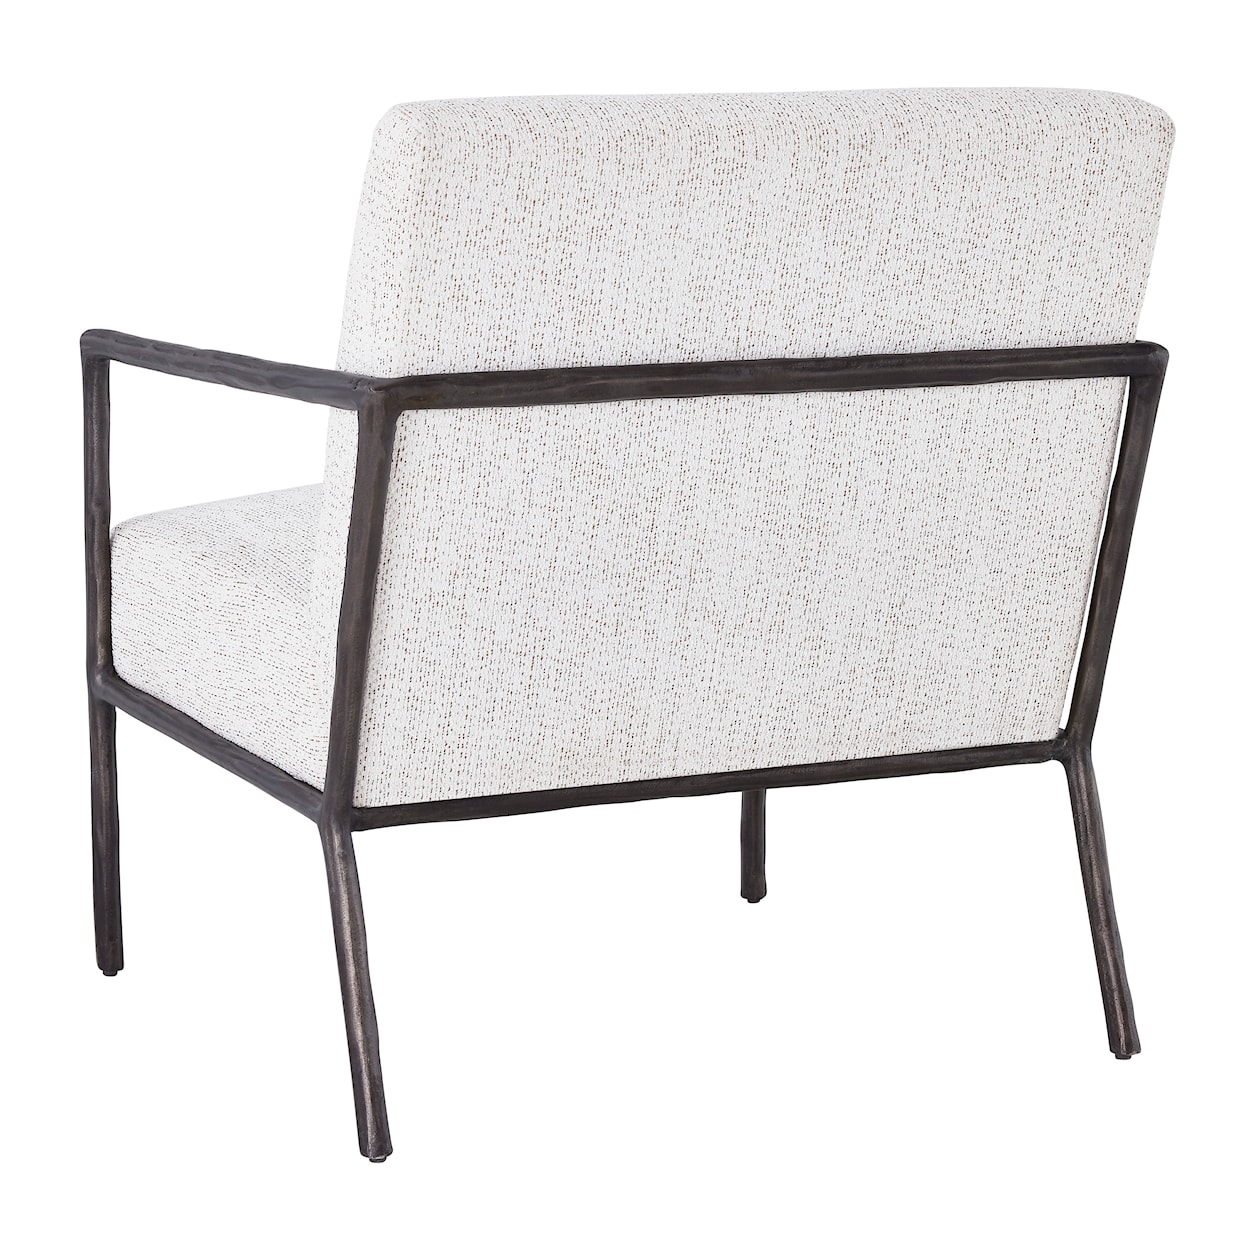 Signature Design by Ashley Ryandale Accent Chair